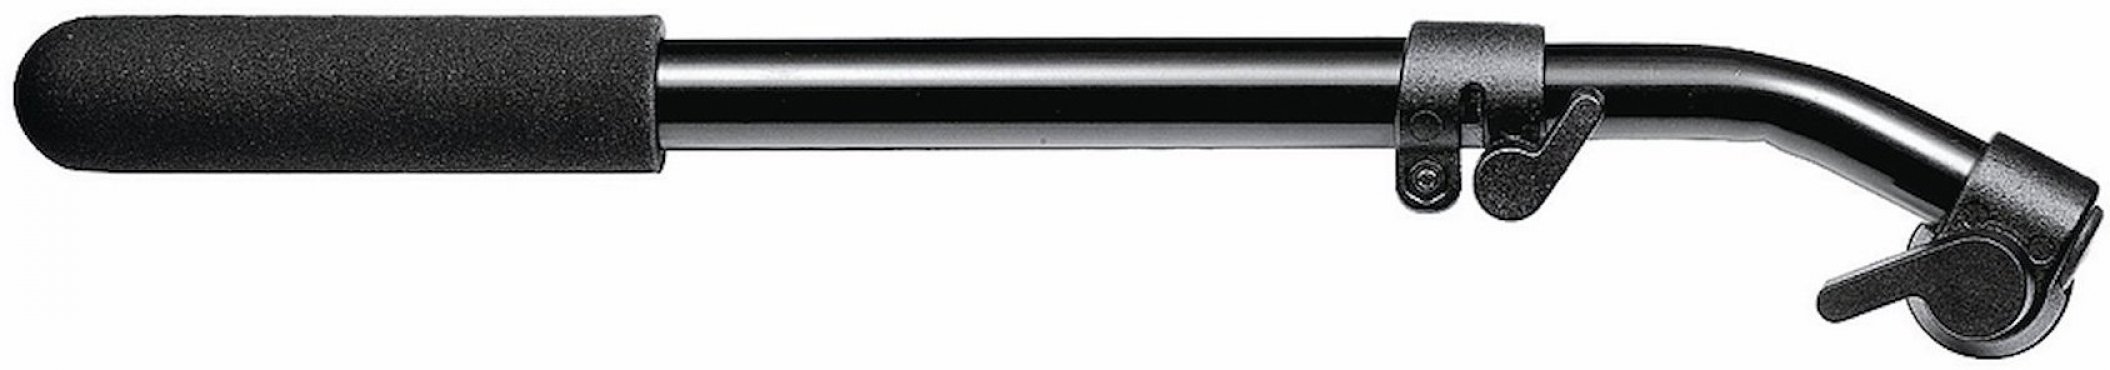 Manfrotto 519LV Telescopic Pan Bar For Video Head